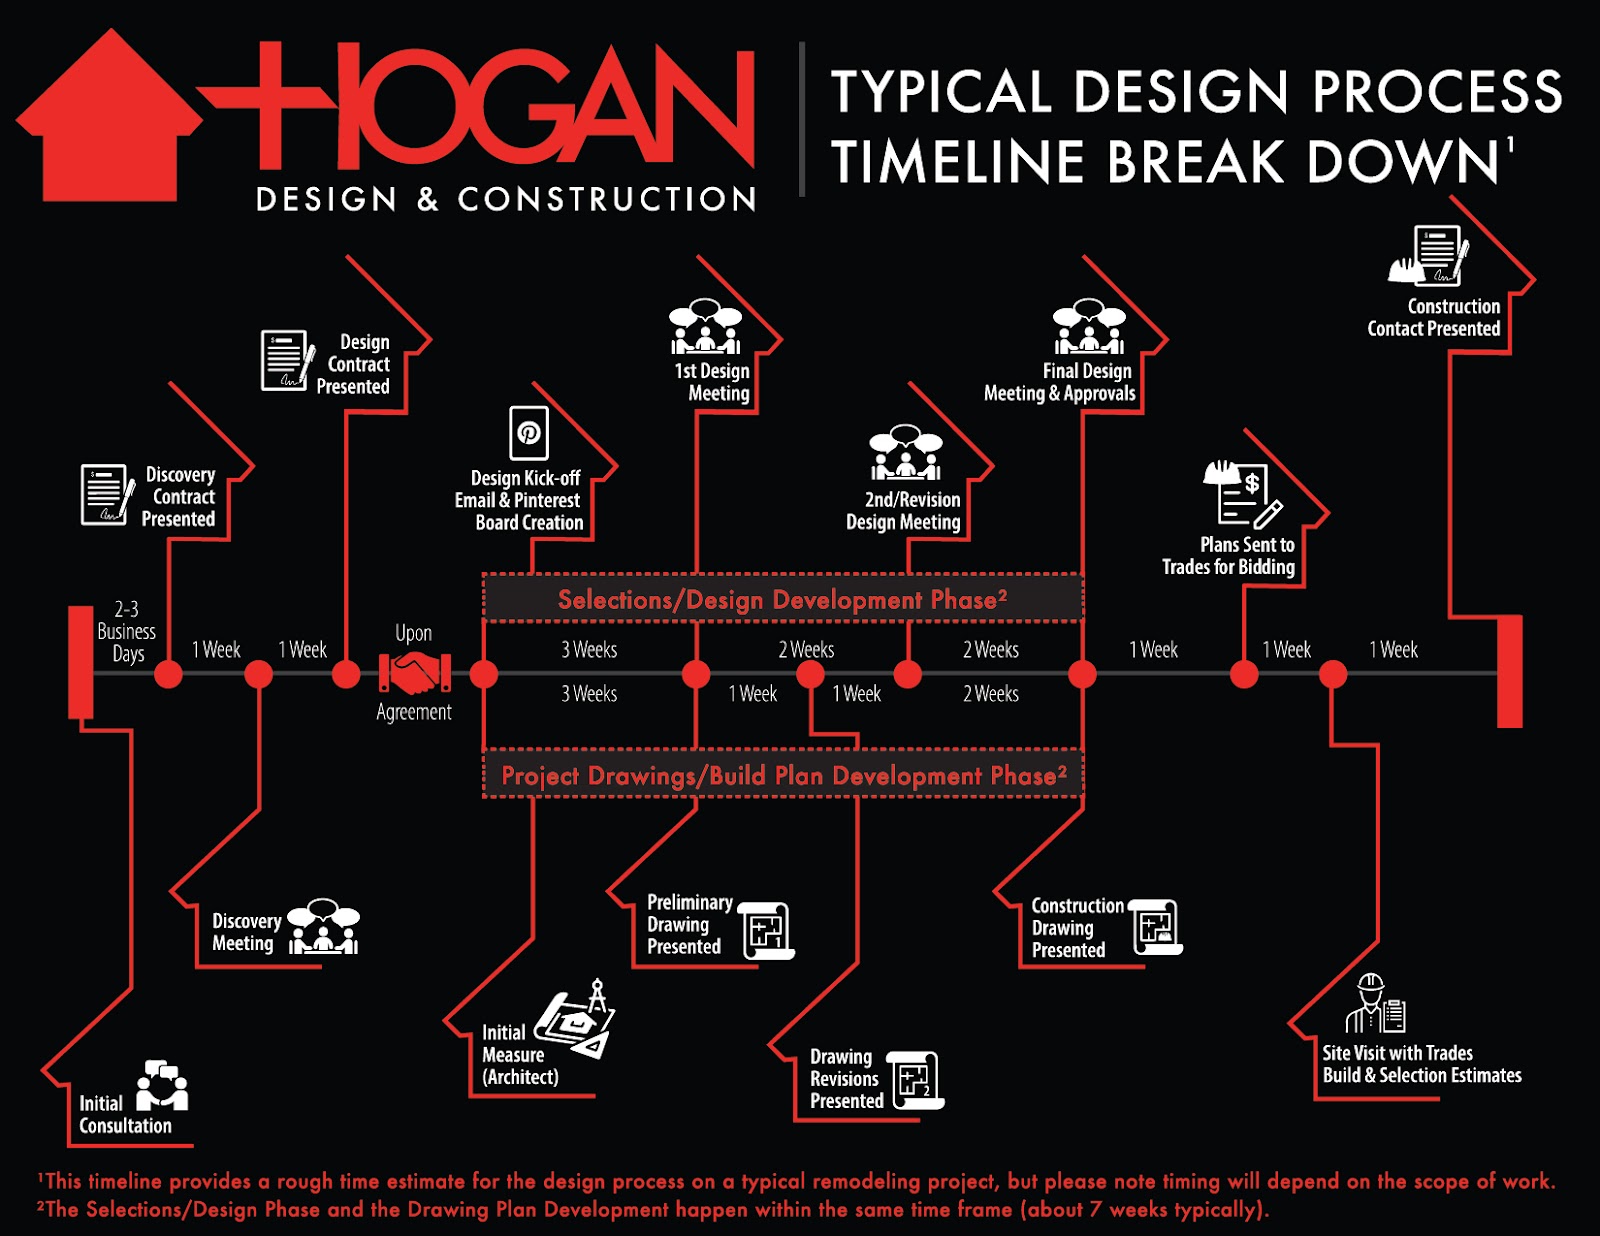 Illustration of the HDC Design and Discovery Processes - from initial contact to construction contract